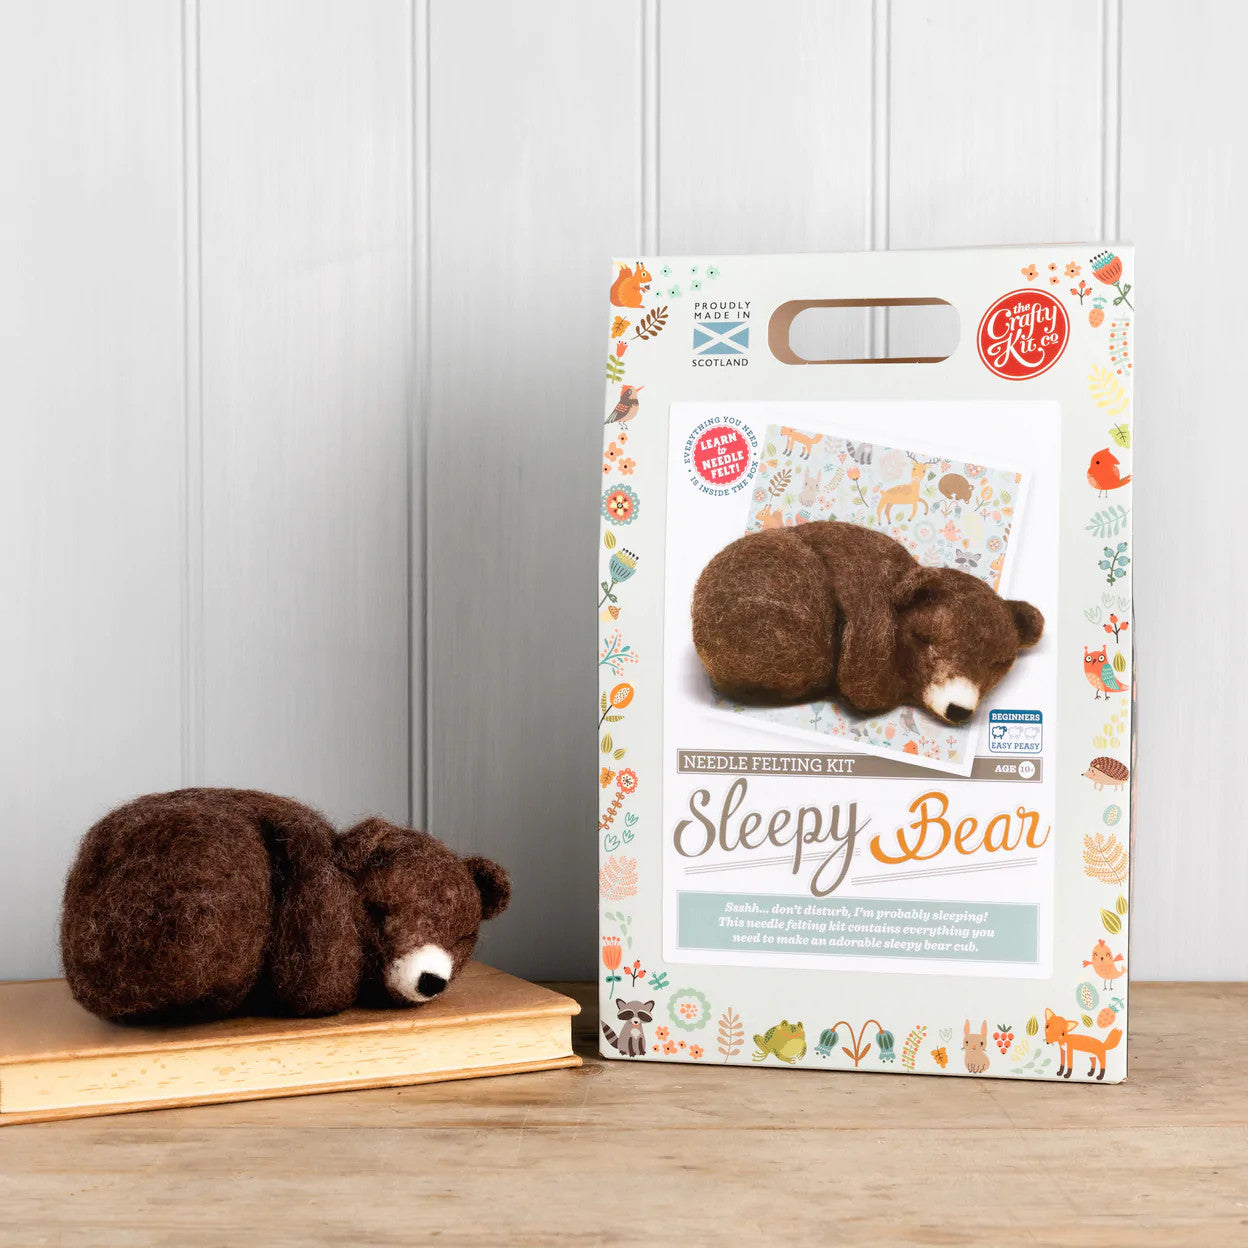 Sleepy Brown Bear Needle Felting Kit from The Crafty Kit Co. Made in Scotland